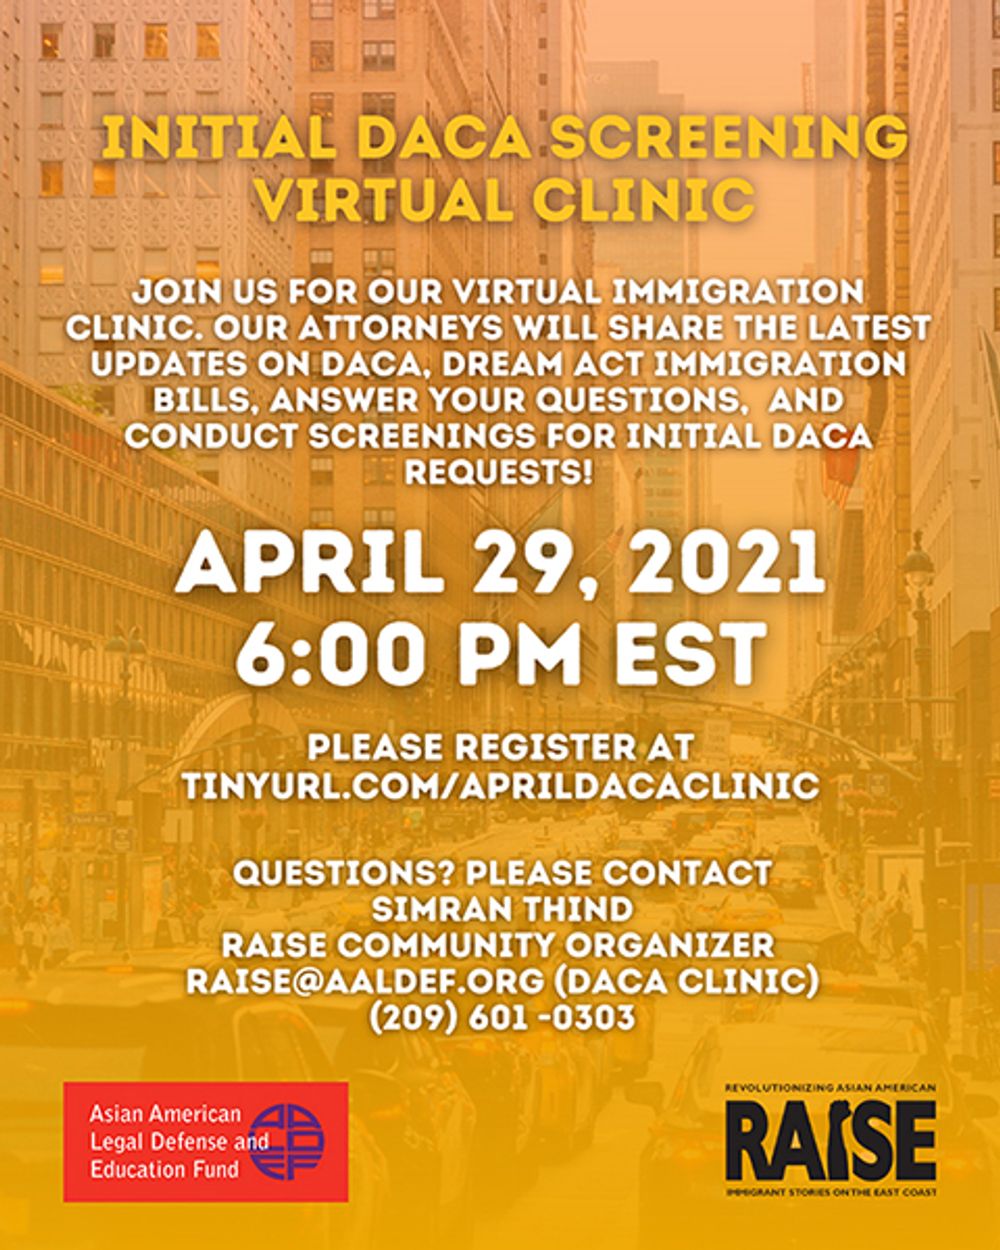 Image for April 29 - Free virtual immigration clinic